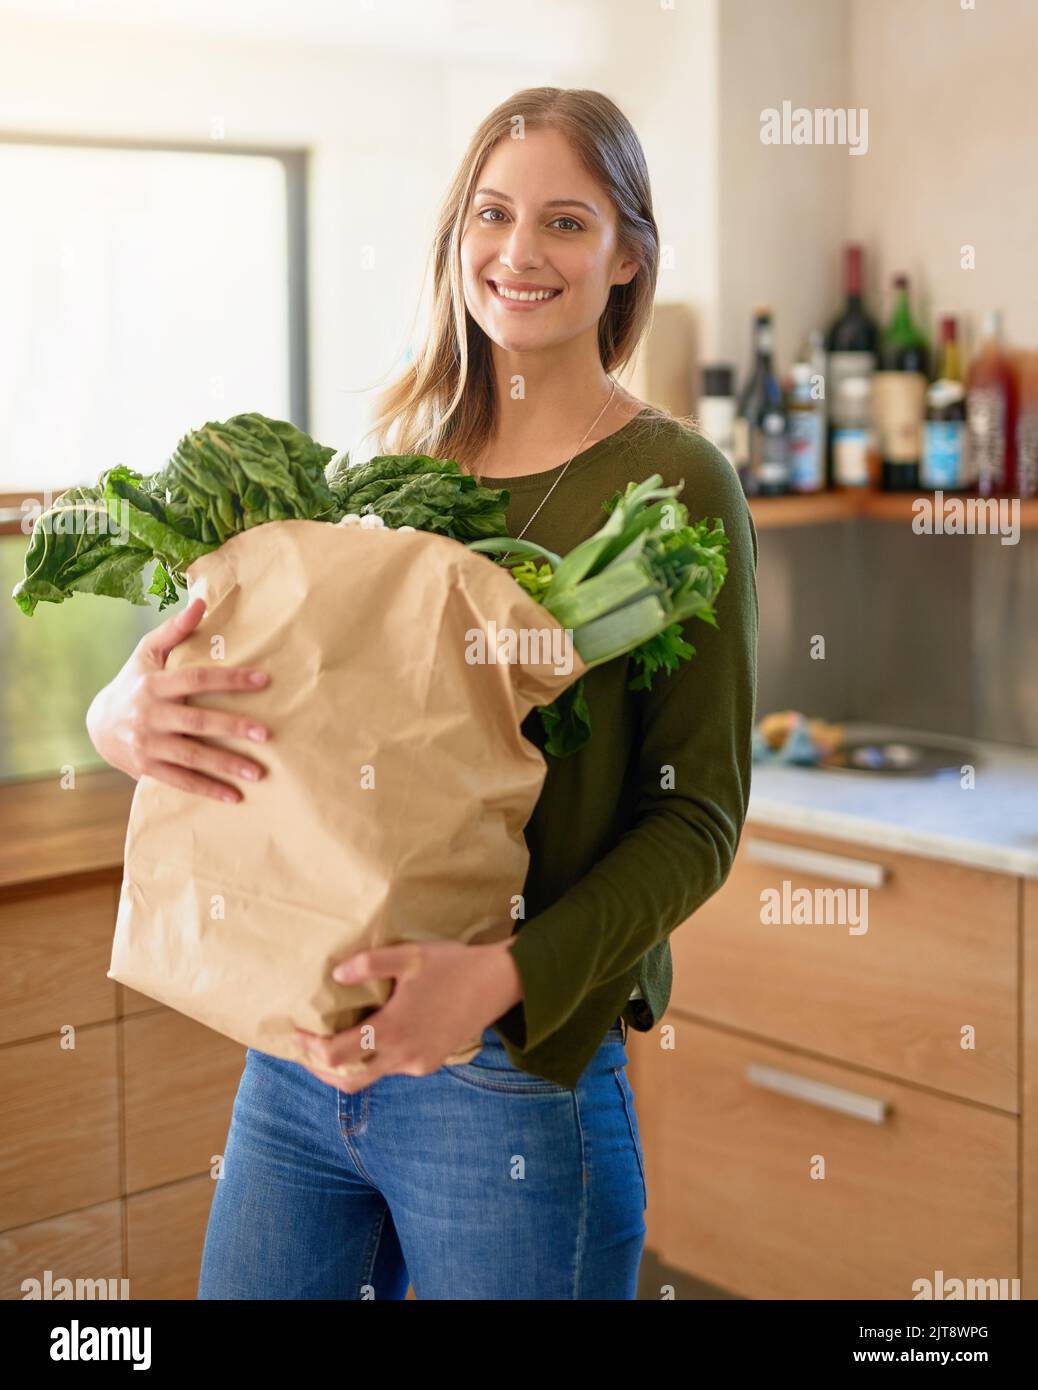 Fresh from the grocers. Portrait of a smiling young woman standing in her kitchen carrying a paper bag full of groceries. Stock Photo